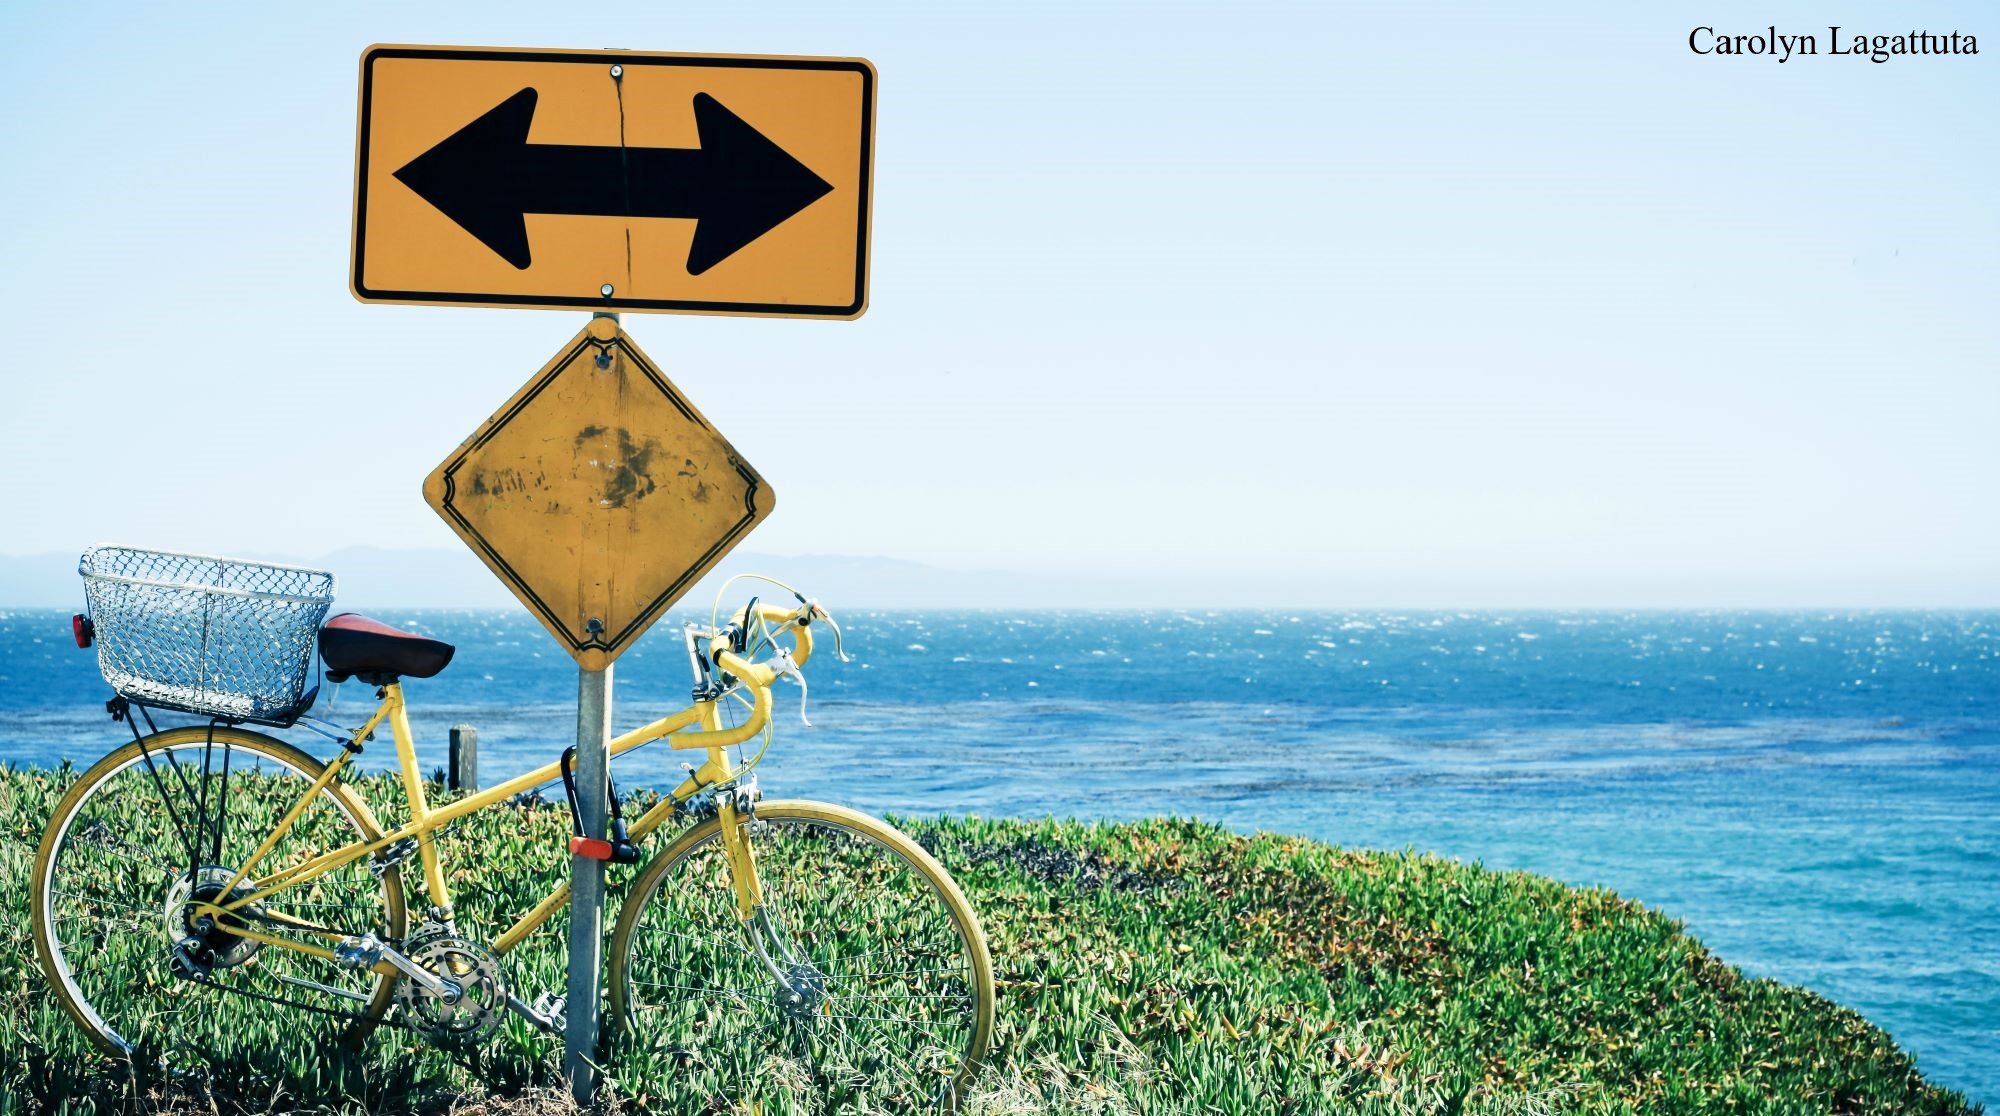 A photo of a bicycle parked against a traffic sign on a bluff above the ocean, by Carolyn Lagattuta